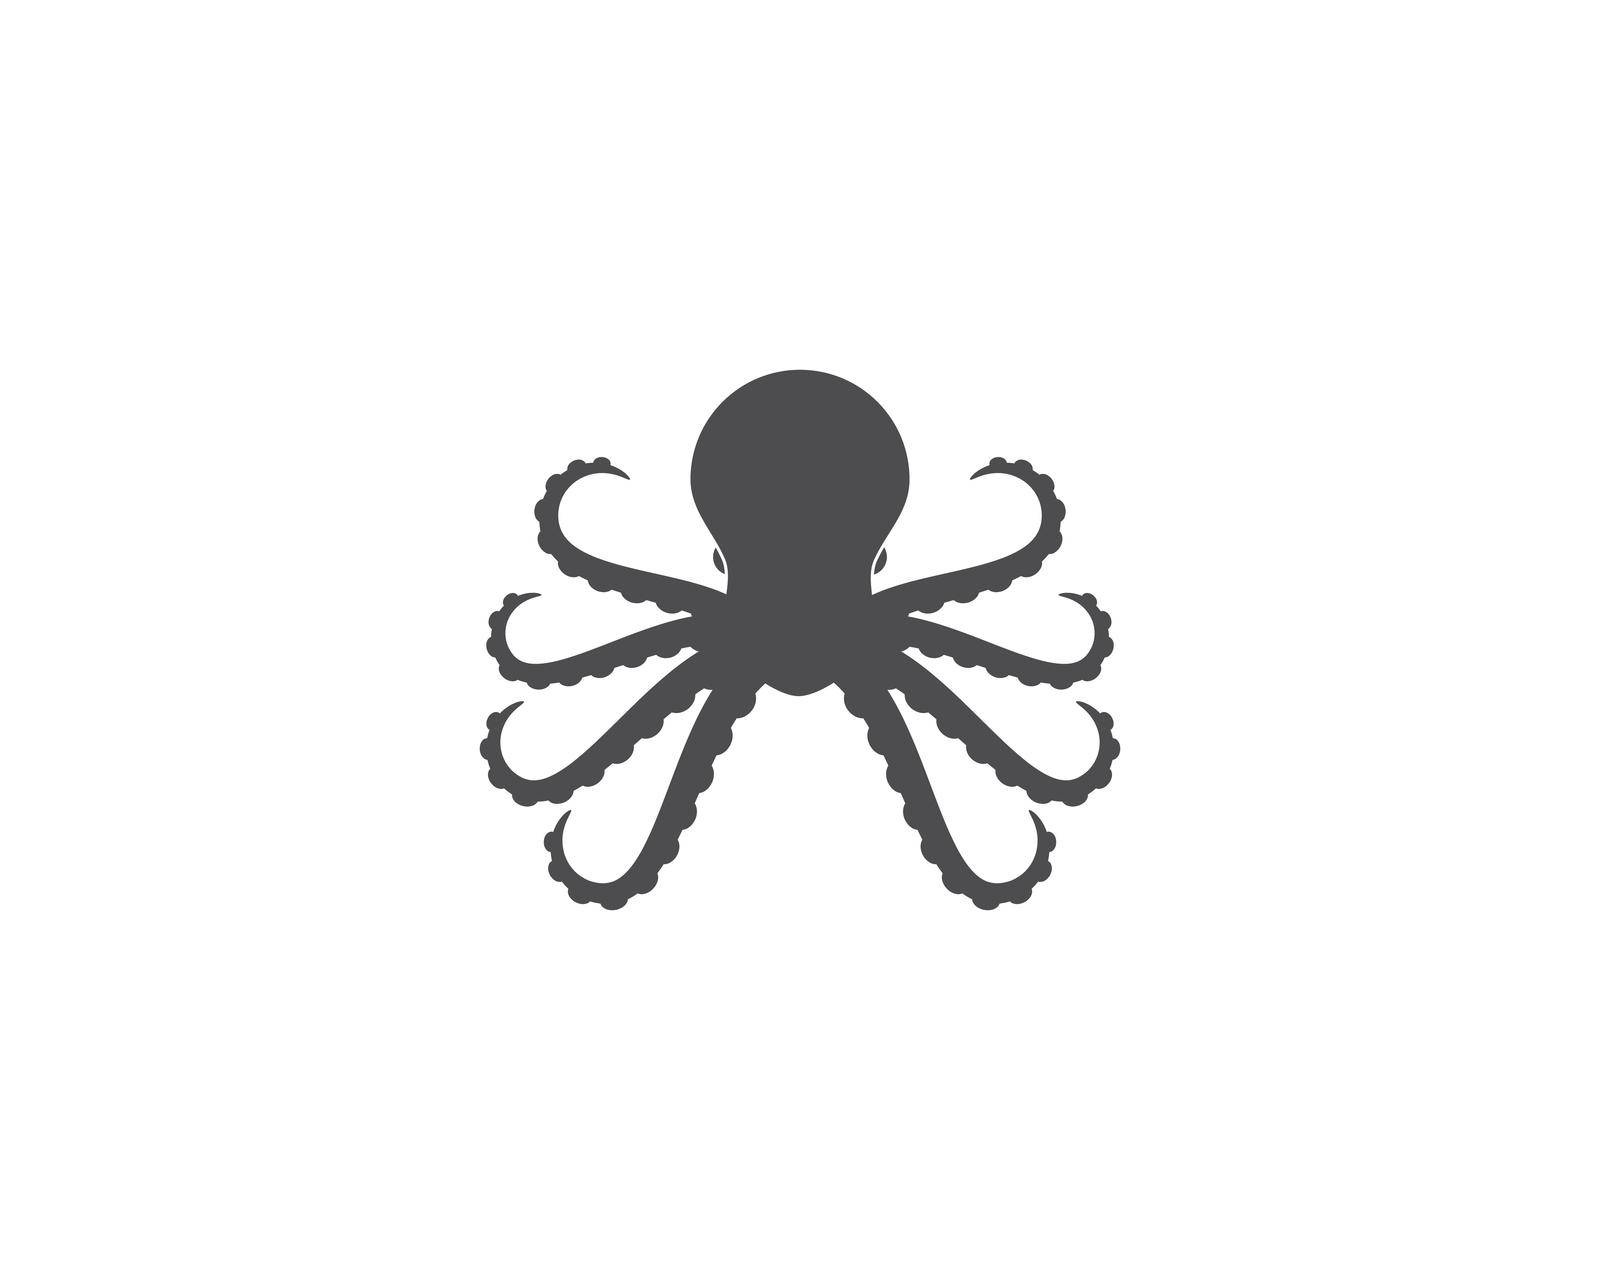 Octopus logo ilustration vector by awk